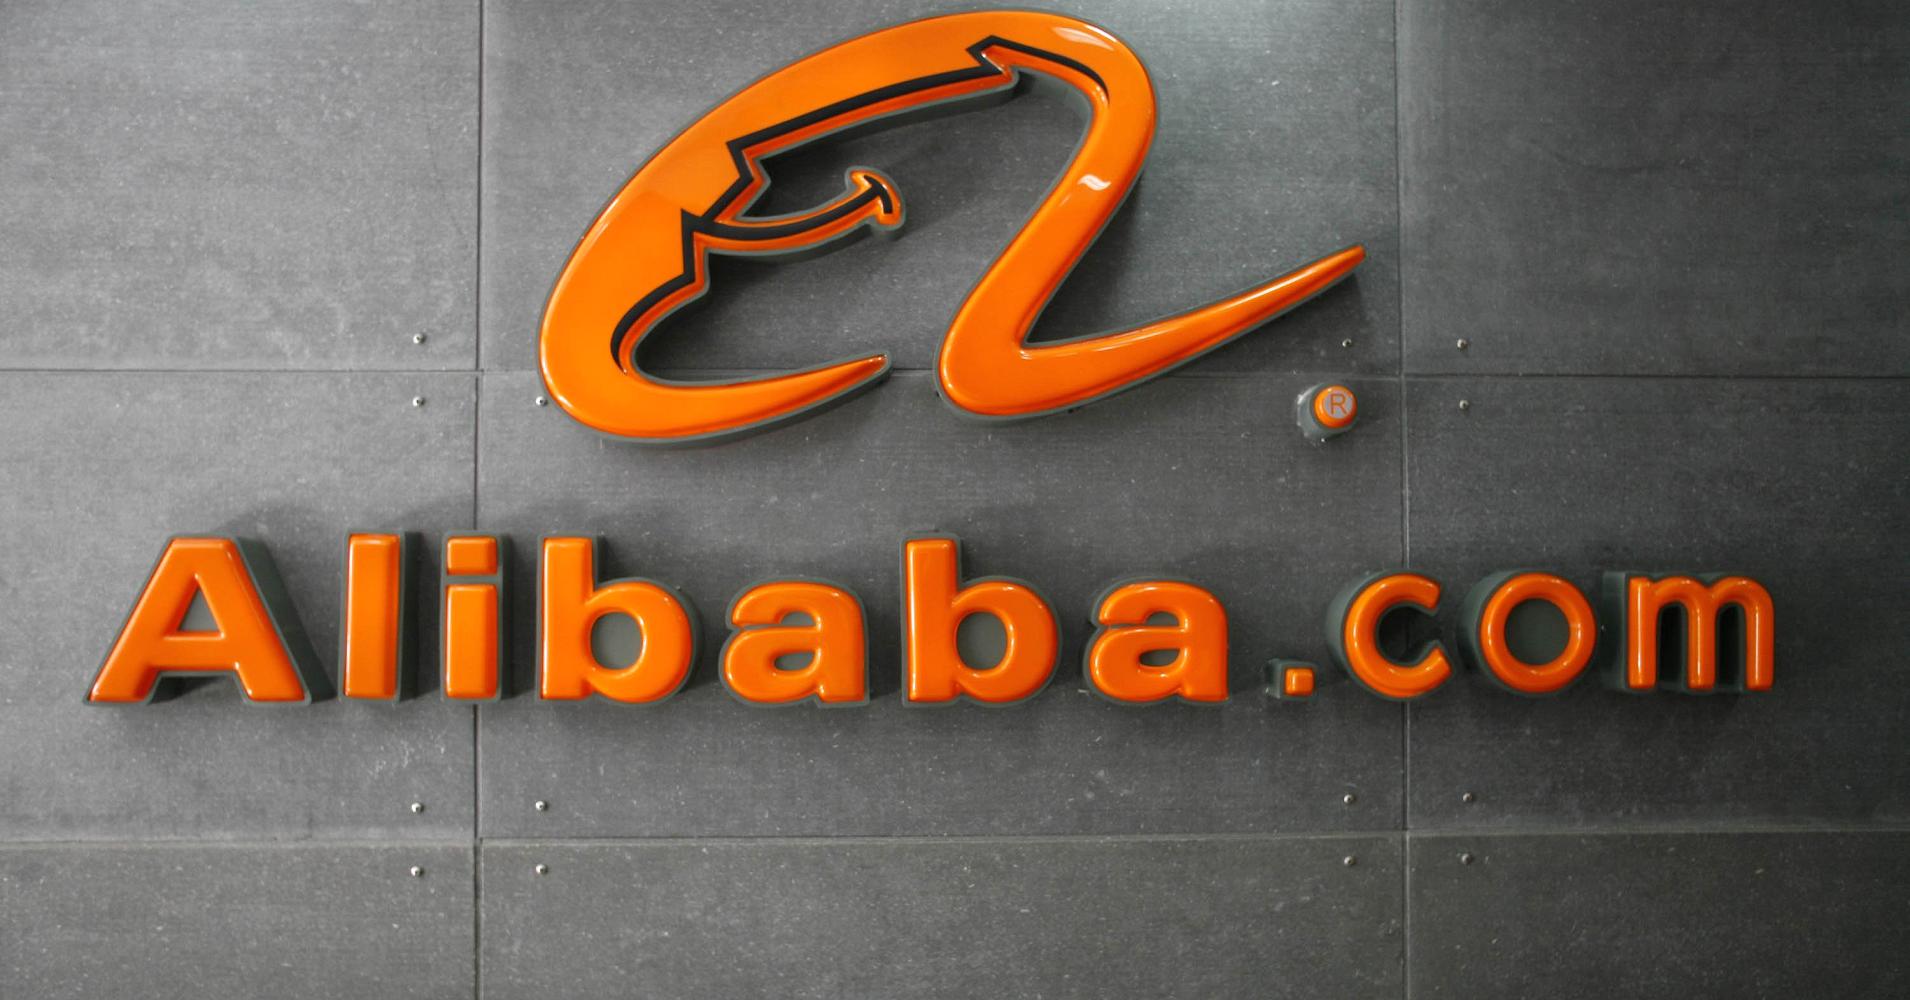 Alibaba Set to Become the World’s Top Retailer